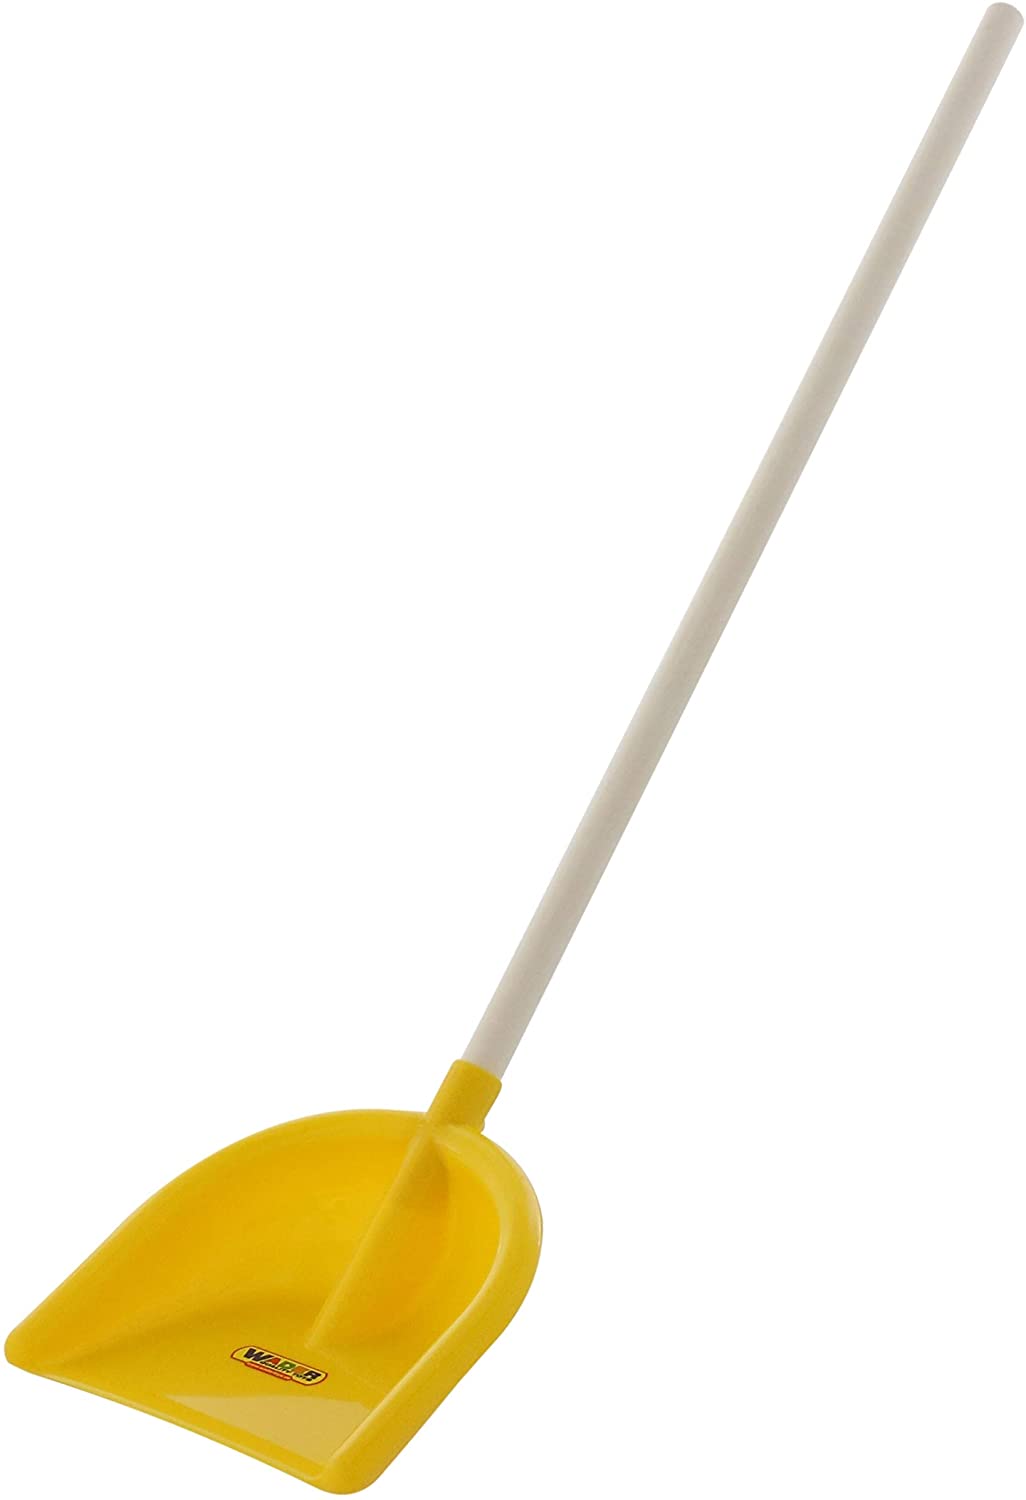 Wader Quality Toys Polesie 40862 Paddle With Wooden Handle Toy, 79 Cm